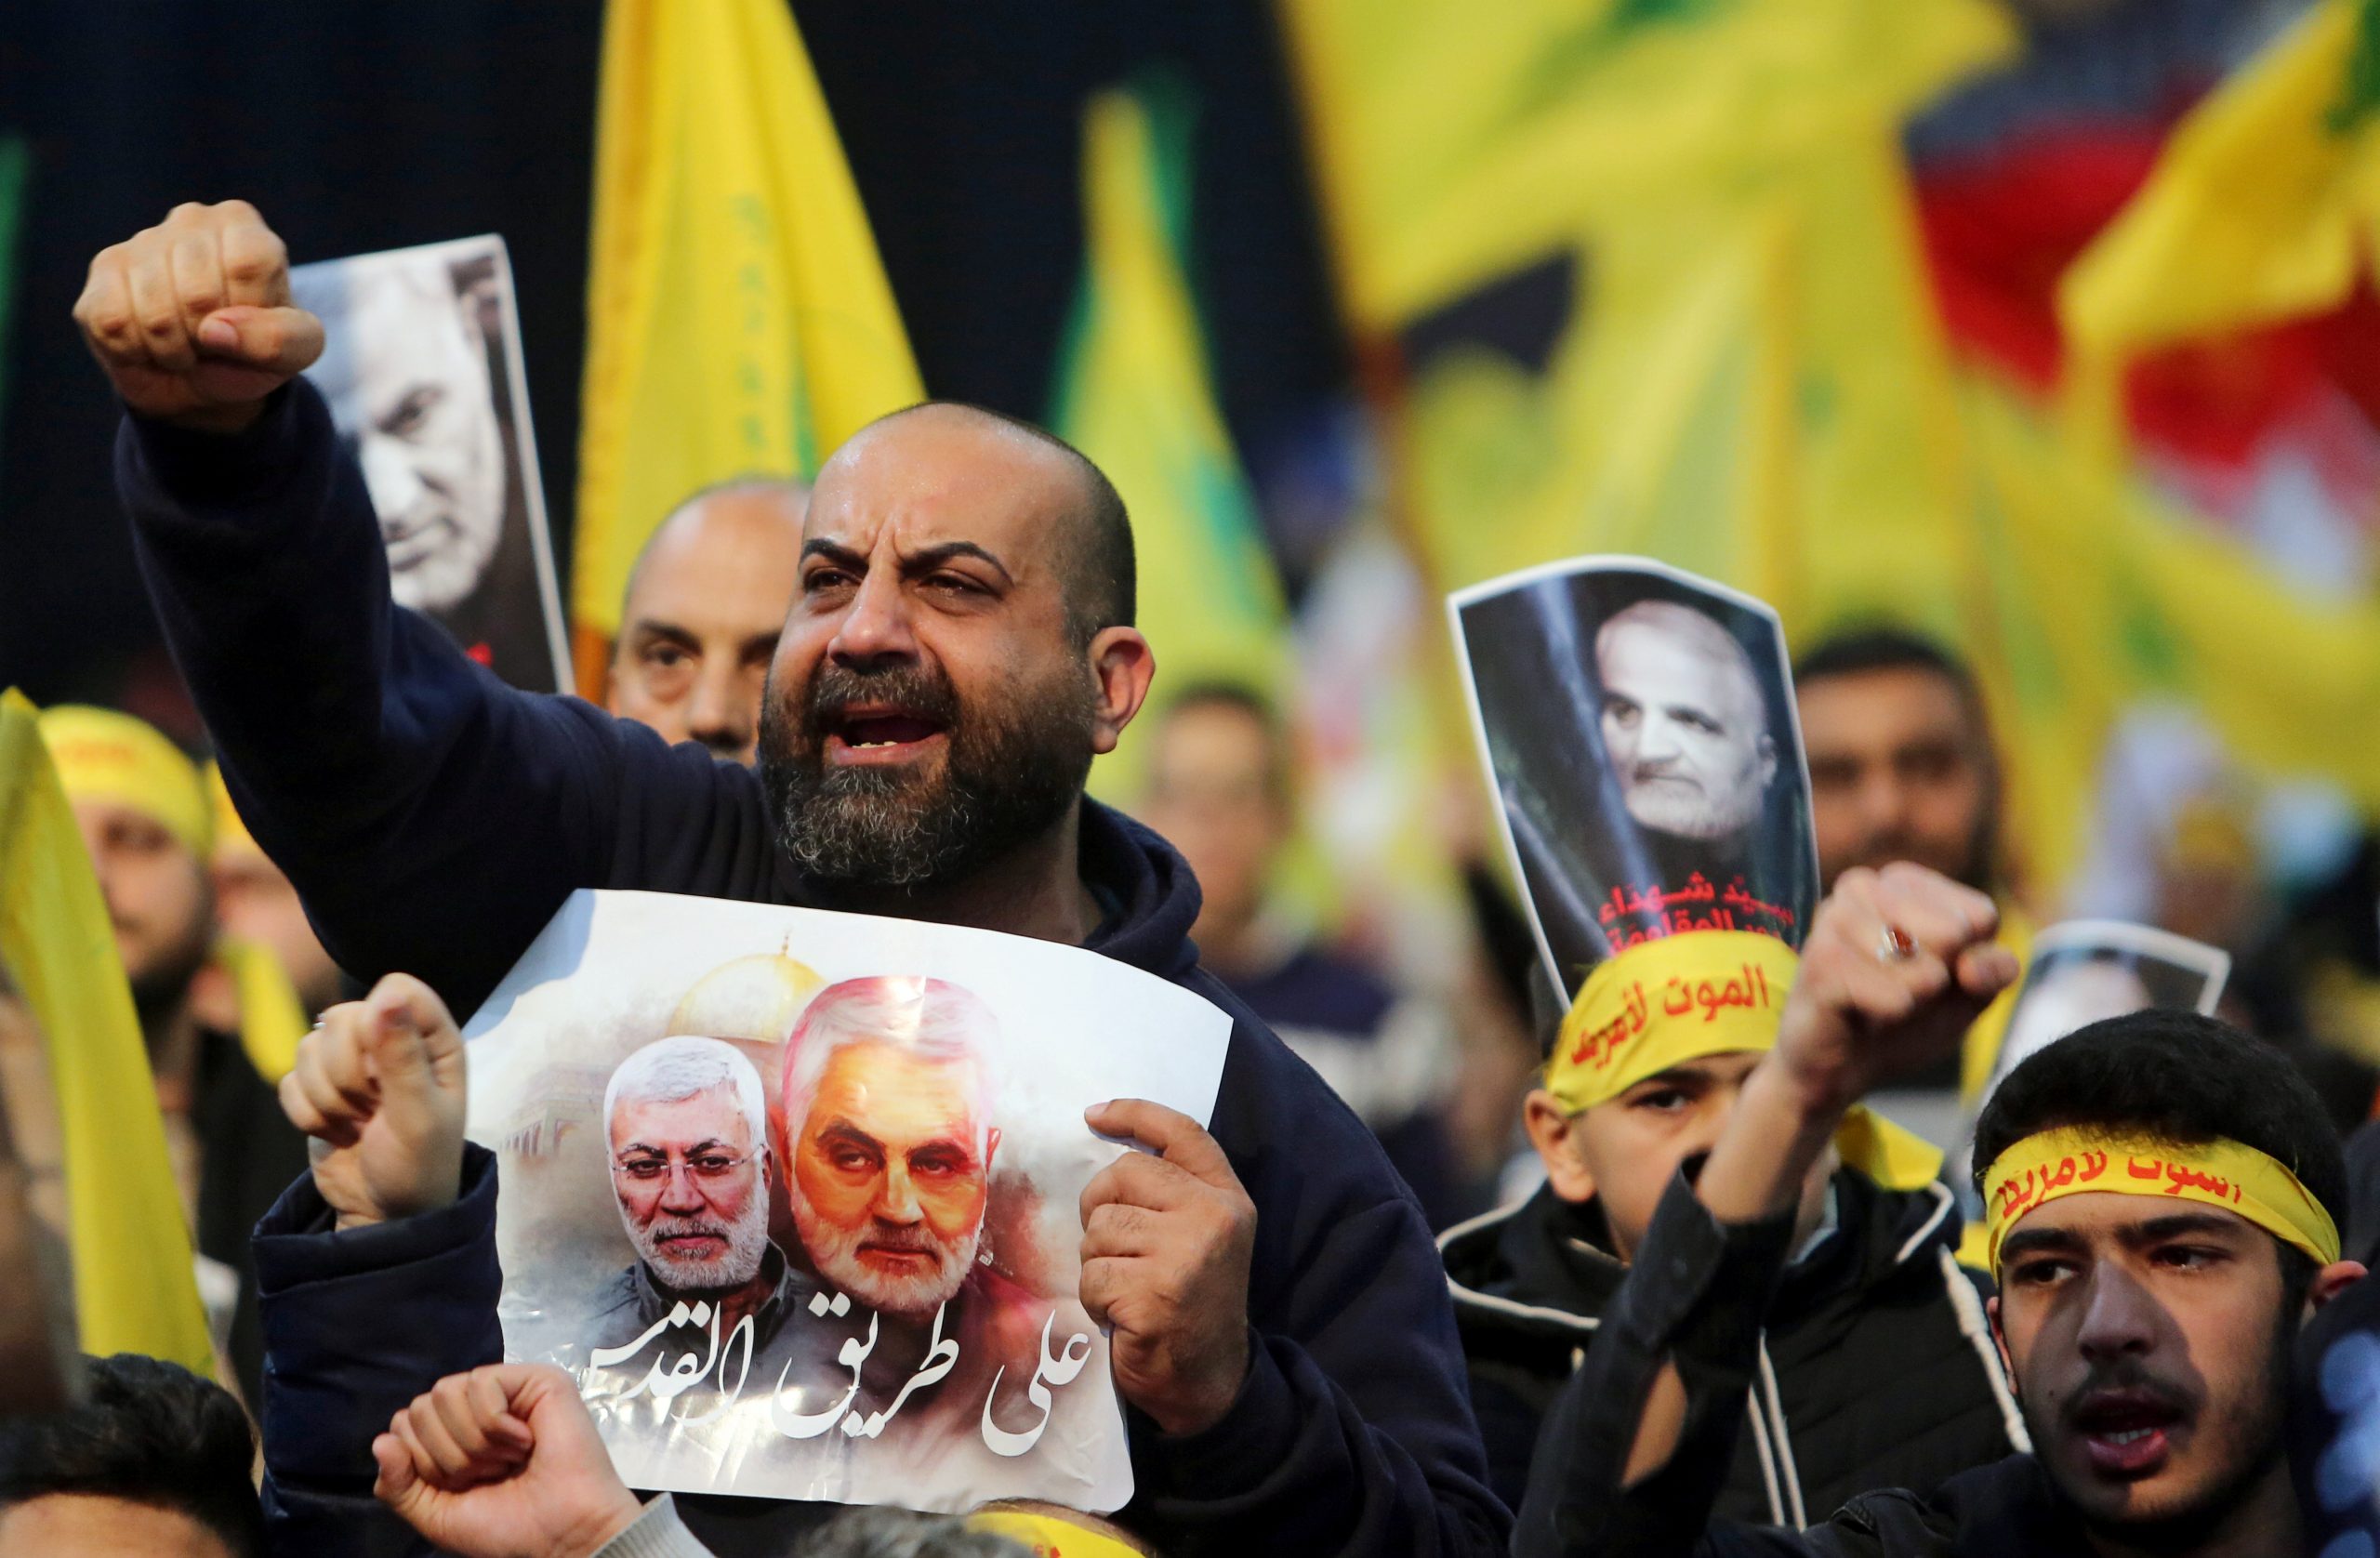 Hezbollah considers the United States, not Israel, its greatest enemy